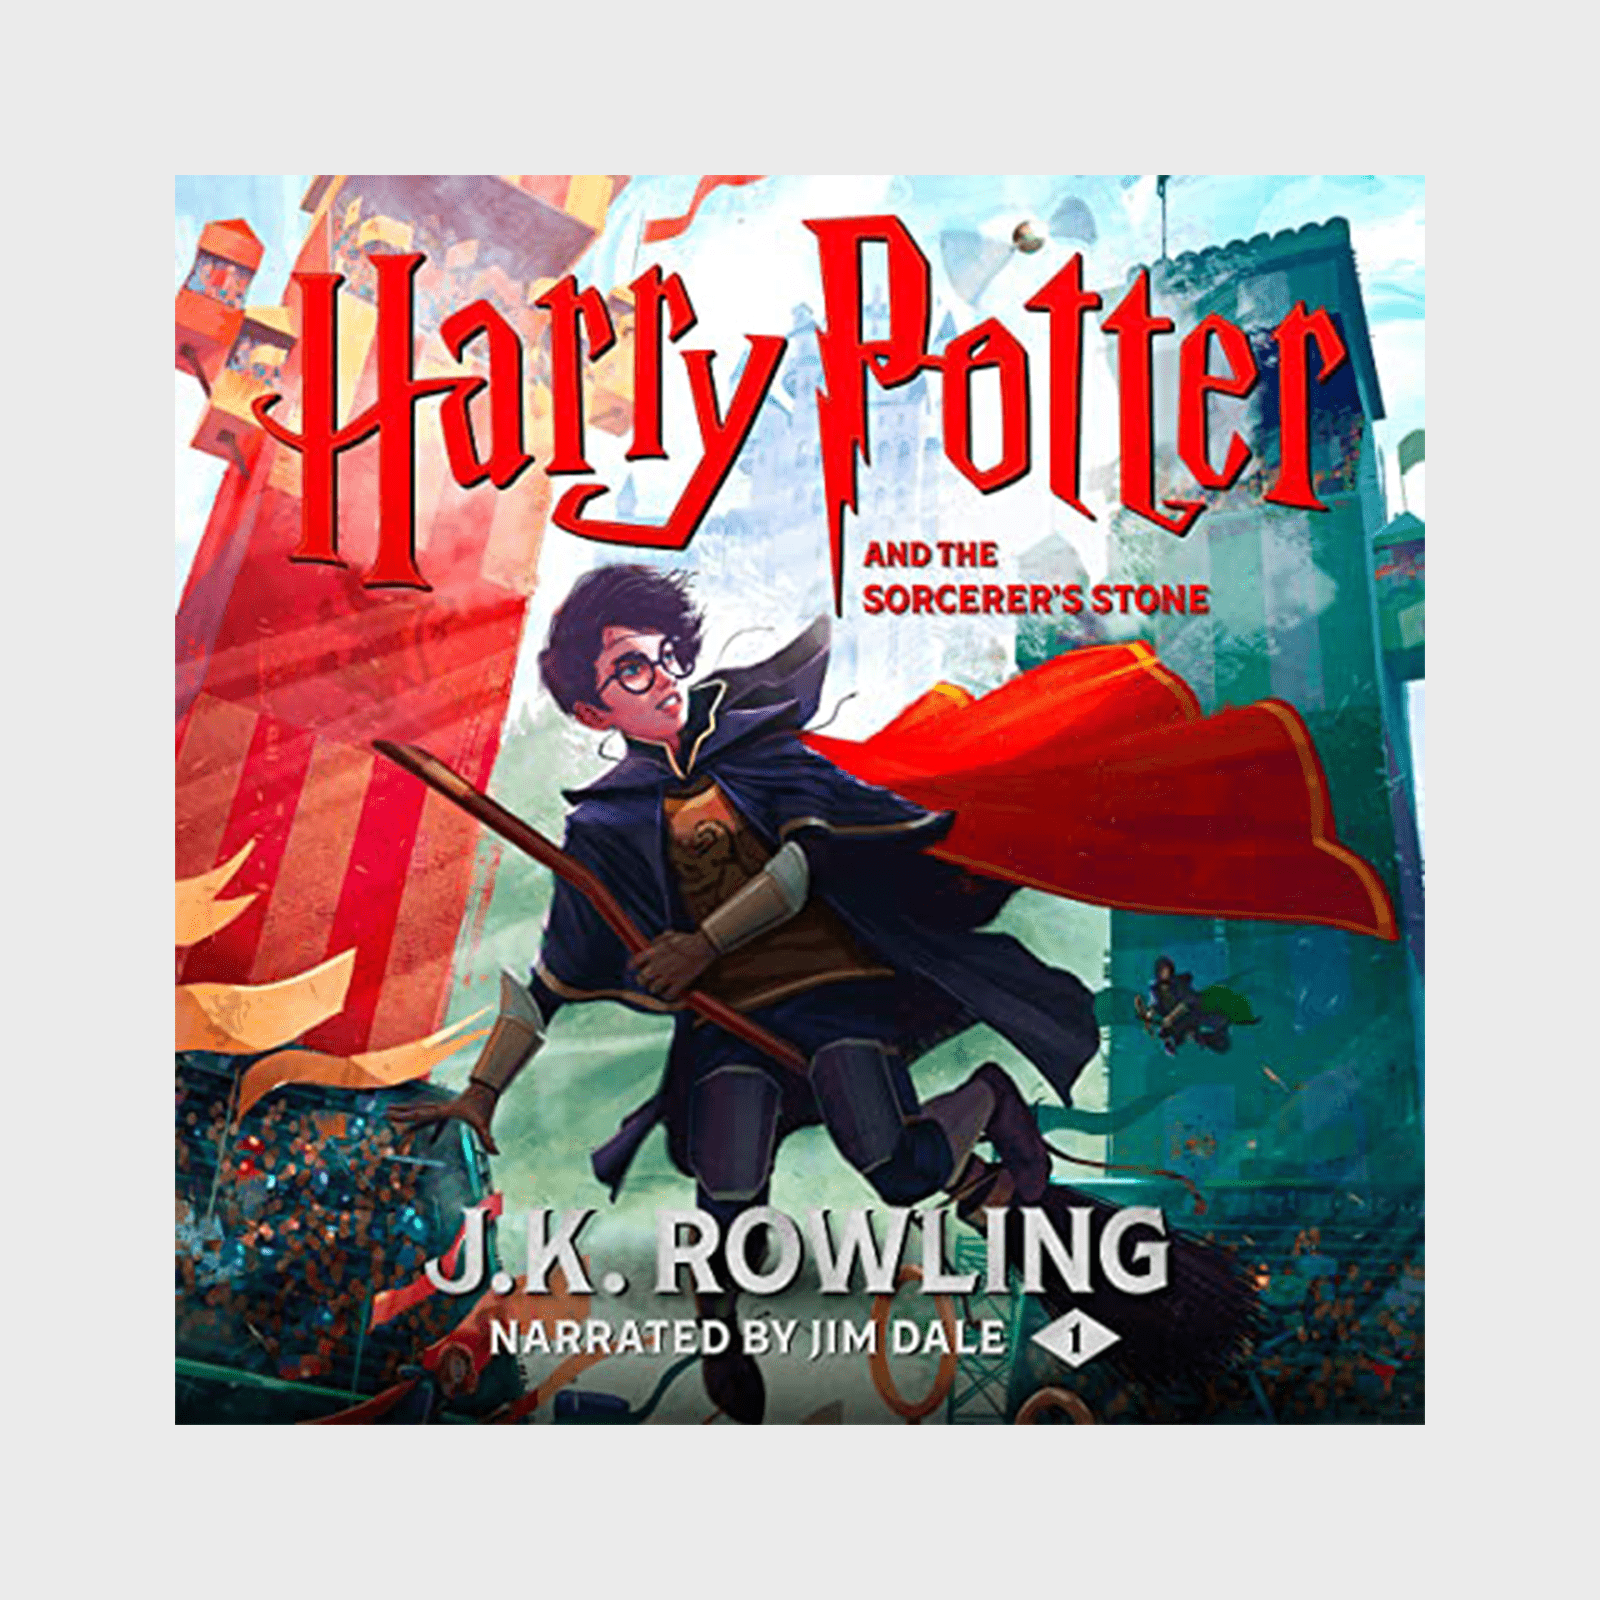 <h3><strong><em>Harry Potter and the Sorcerer's Stone</em> by J.K. Rowling</strong></h3> <p>No list of book recommendations would be complete without <a href="https://www.amazon.com/Harry-Potter-Sorcerers-Stone-Book/dp/B017V4IMVQ/" rel="noopener noreferrer"><em>Harry Potter</em></a>, one of the best <a href="https://www.rd.com/list/the-best-childrens-books-ever-written/" rel="noopener noreferrer">children's books</a> ever written. Kids and adults of all ages will relish the magical world of the title character, an orphaned wizard who lives in a cupboard under the stairs in his cruel (non-magic) aunt and uncle's house. That is, until mysterious letters begin to arrive from Hogwarts School of Witchcraft and Wizardry. In this timeless classic, Harry embarks on a fantastical adventure in which he learns the truth about his identity, what it means to belong, and the meaning of friendship. It's also one of the best audiobooks ever, read by Grammy and Audie Award winner Jim Dale.</p> <p class="listicle-page__cta-button-shop"><a class="shop-btn" href="https://www.amazon.com/Harry-Potter-Sorcerers-Stone-Book/dp/B017V4IMVQ/">Shop Now</a></p>